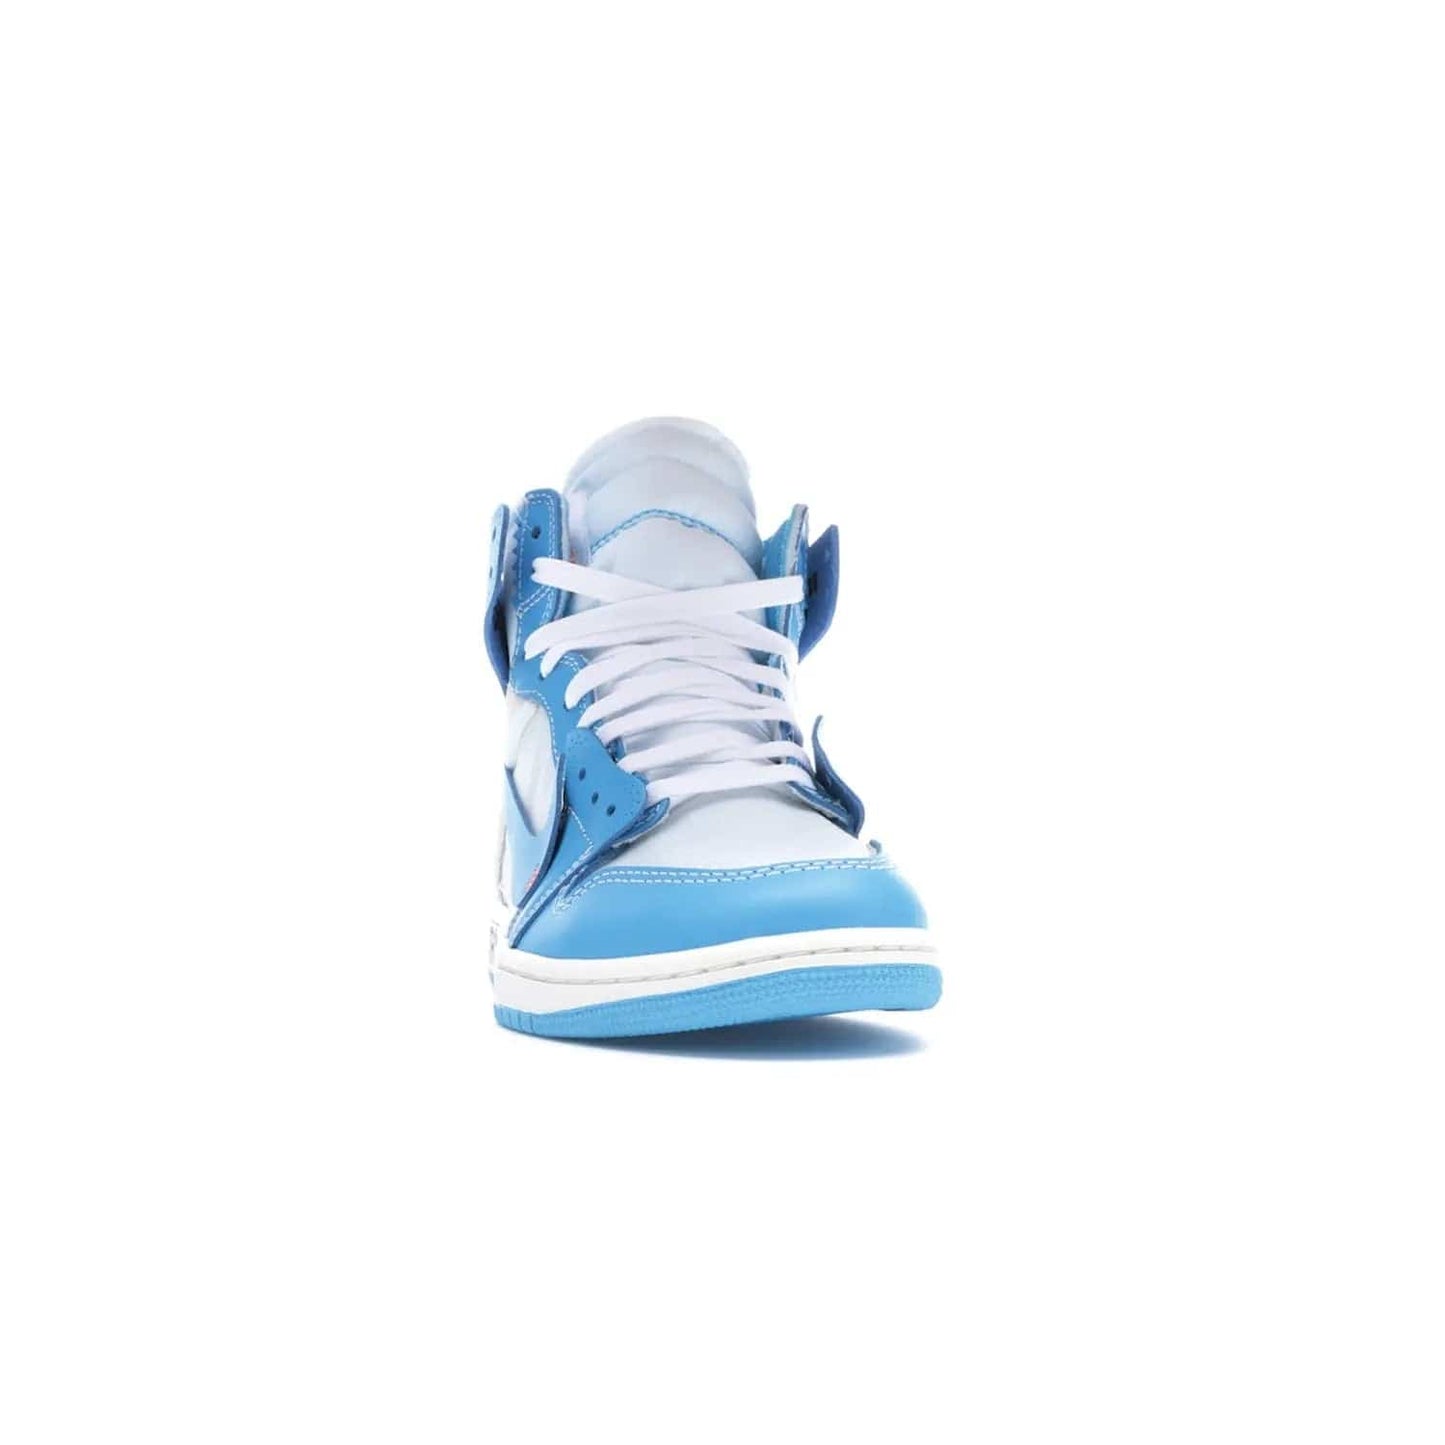 Jordan 1 Retro High Off-White University Blue - Image 9 - Only at www.BallersClubKickz.com - Classic Jordan 1 Retro High "Off-White UNC" sneakers meld style and comfort. Boasting deconstructed white and blue leather, Off-White detailing, and a white, dark powder blue and cone colorway, these sneakers are perfect for dressing up or down. Get the iconic Off-White Jordan 1's and upgrade your look.